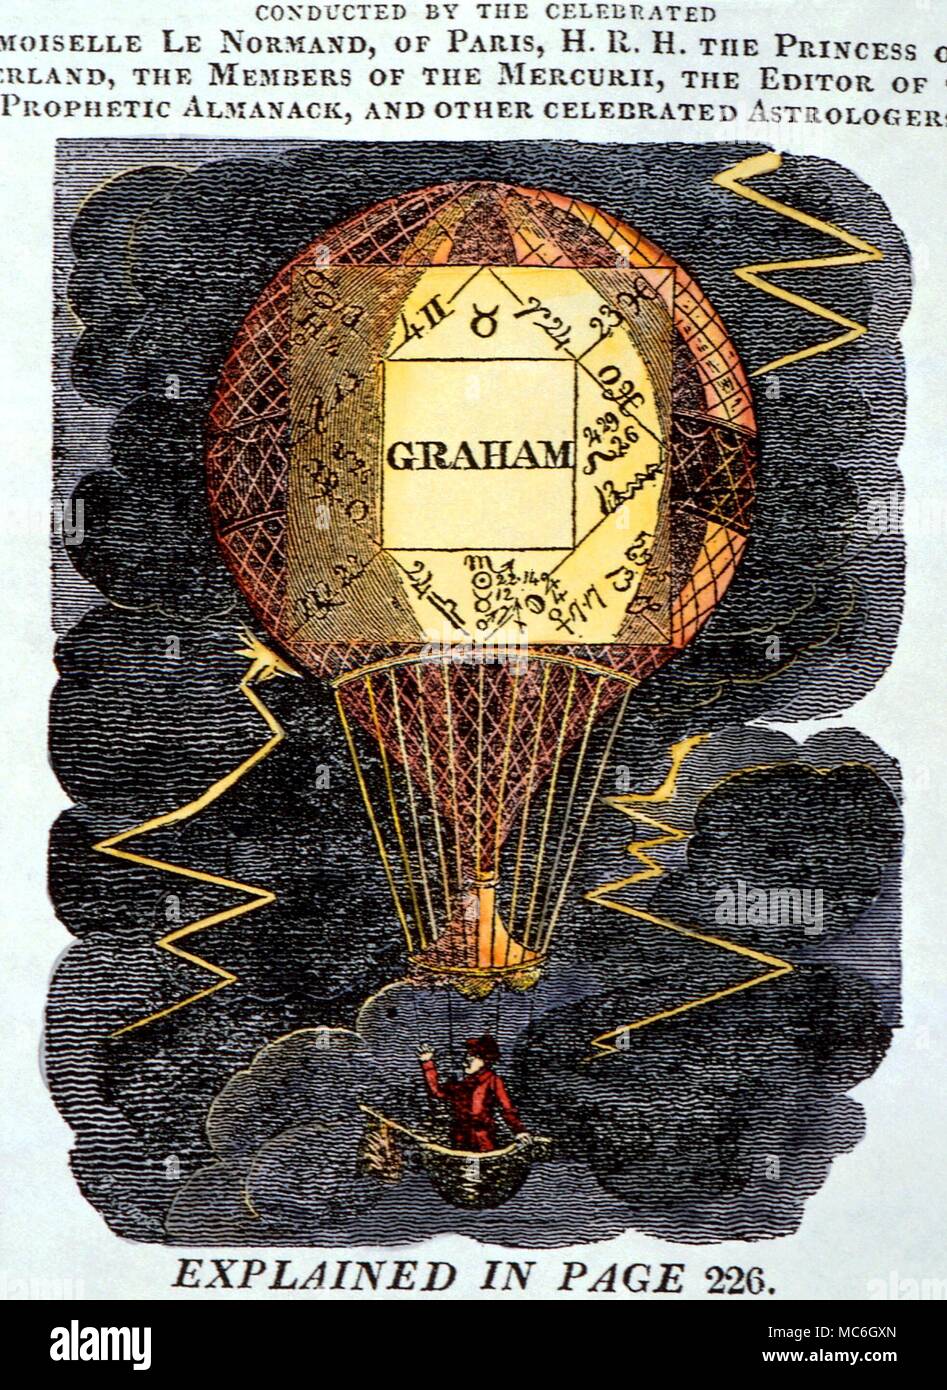 HOROSCOPES - The horoscope of the Balloonist Graham. An early example of a horoscope. From The Straggling Astrologer of the Nineteen Century, 1824 Stock Photo